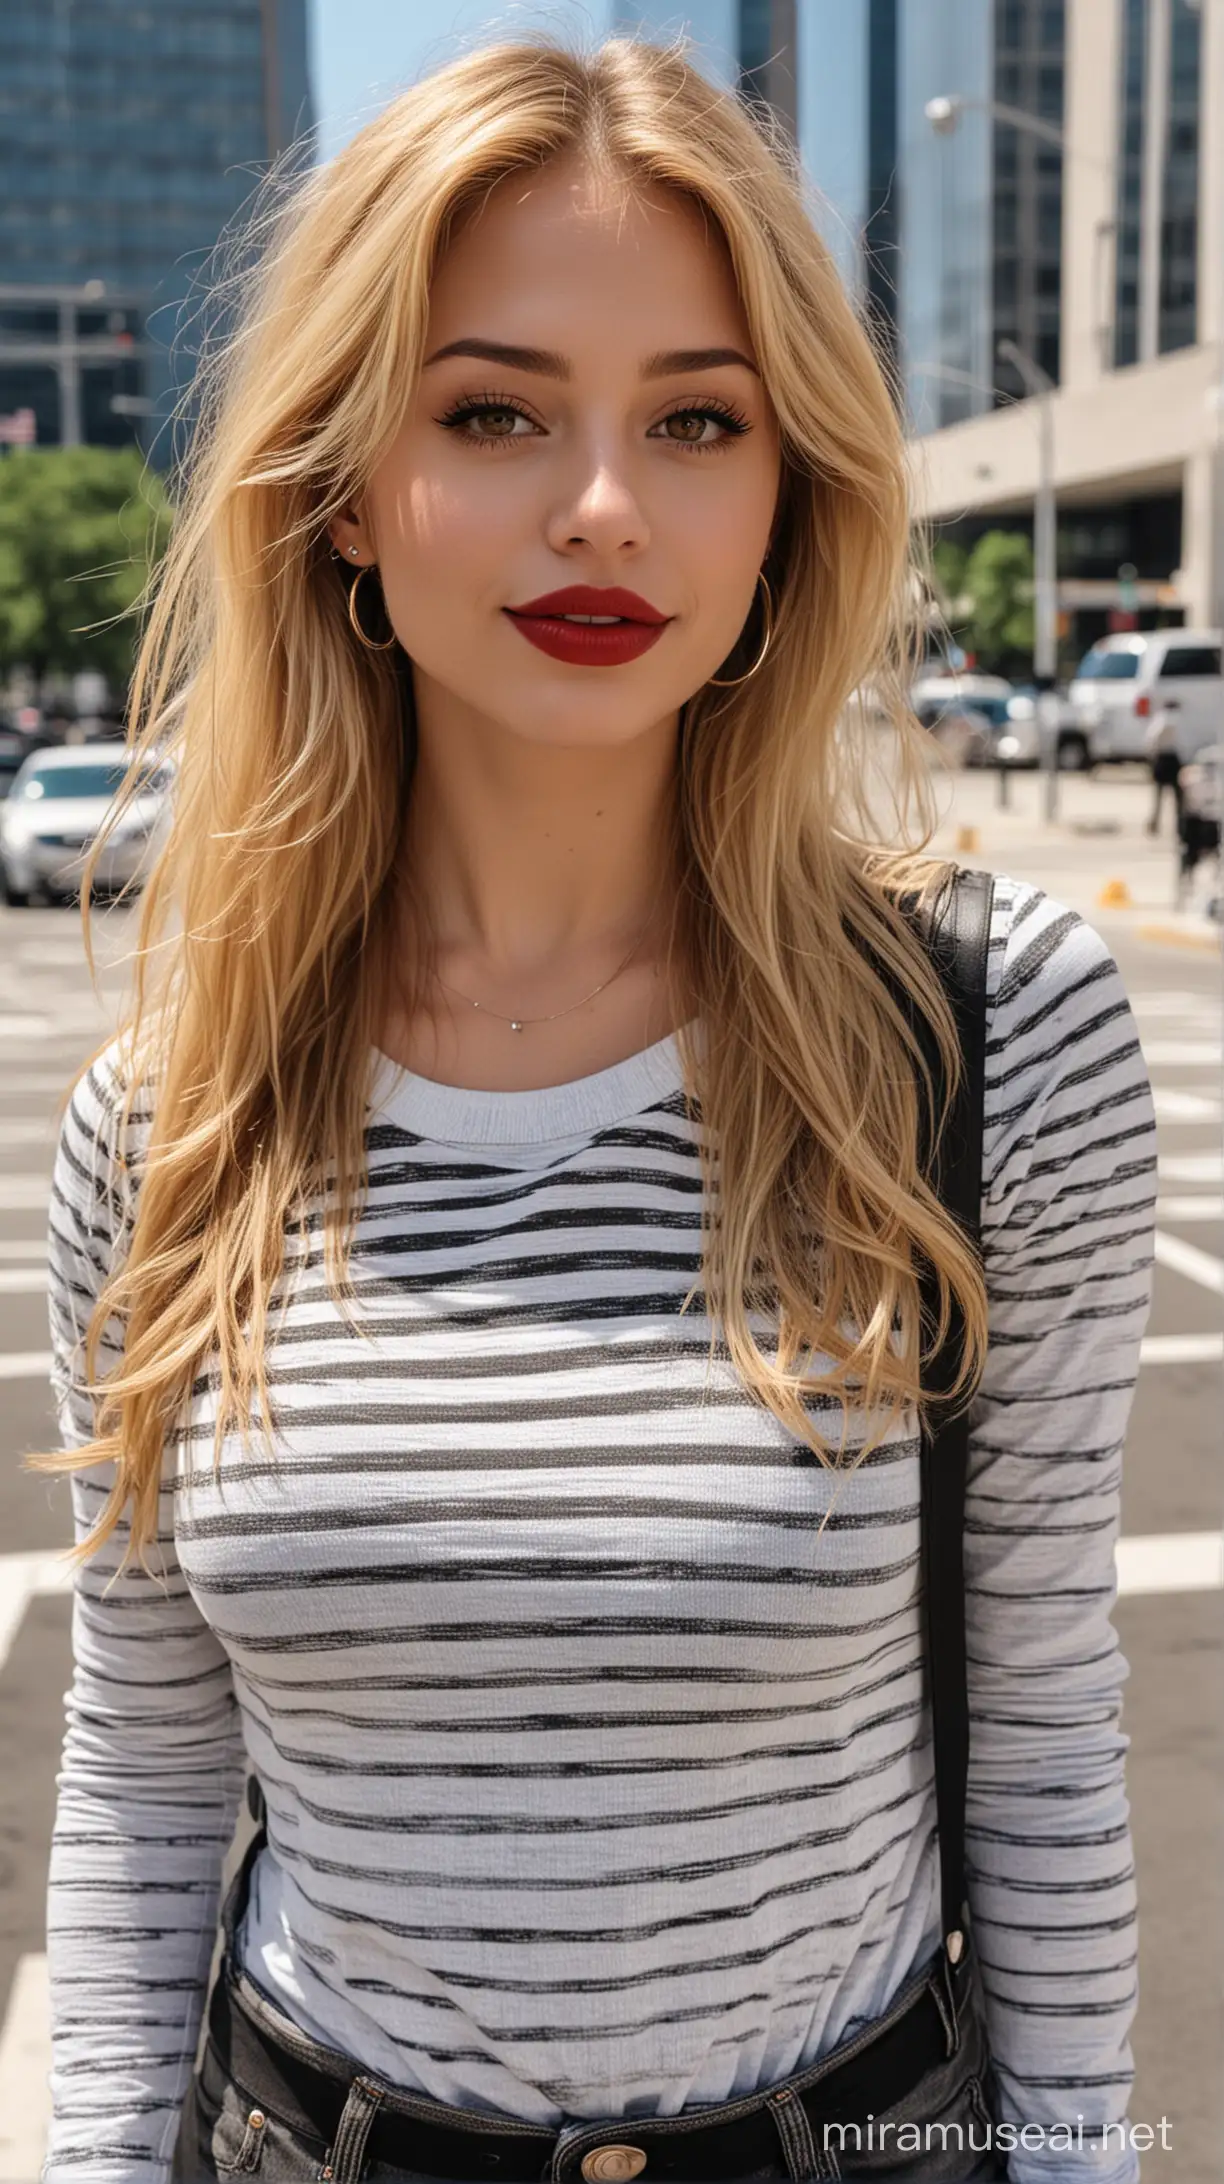 4k Ai art front view beautiful USA girl golden hair red lipstick nose ring ear tops brown jeans and black white line shirt in usa skyscraper parking